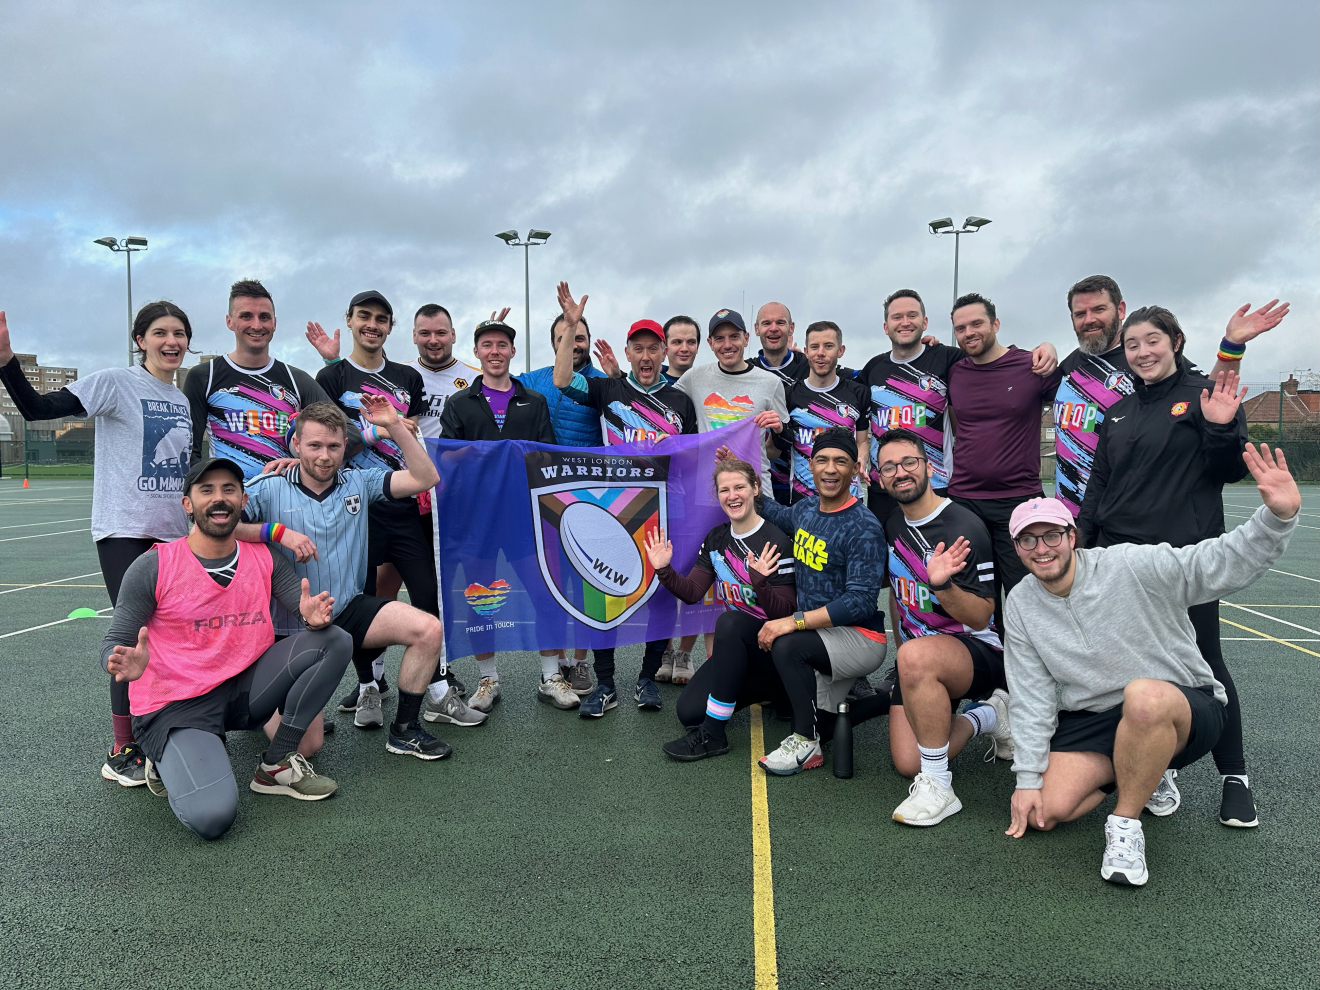 Ealing Trailfinders partner with The West London Queer project and Pride in Touch